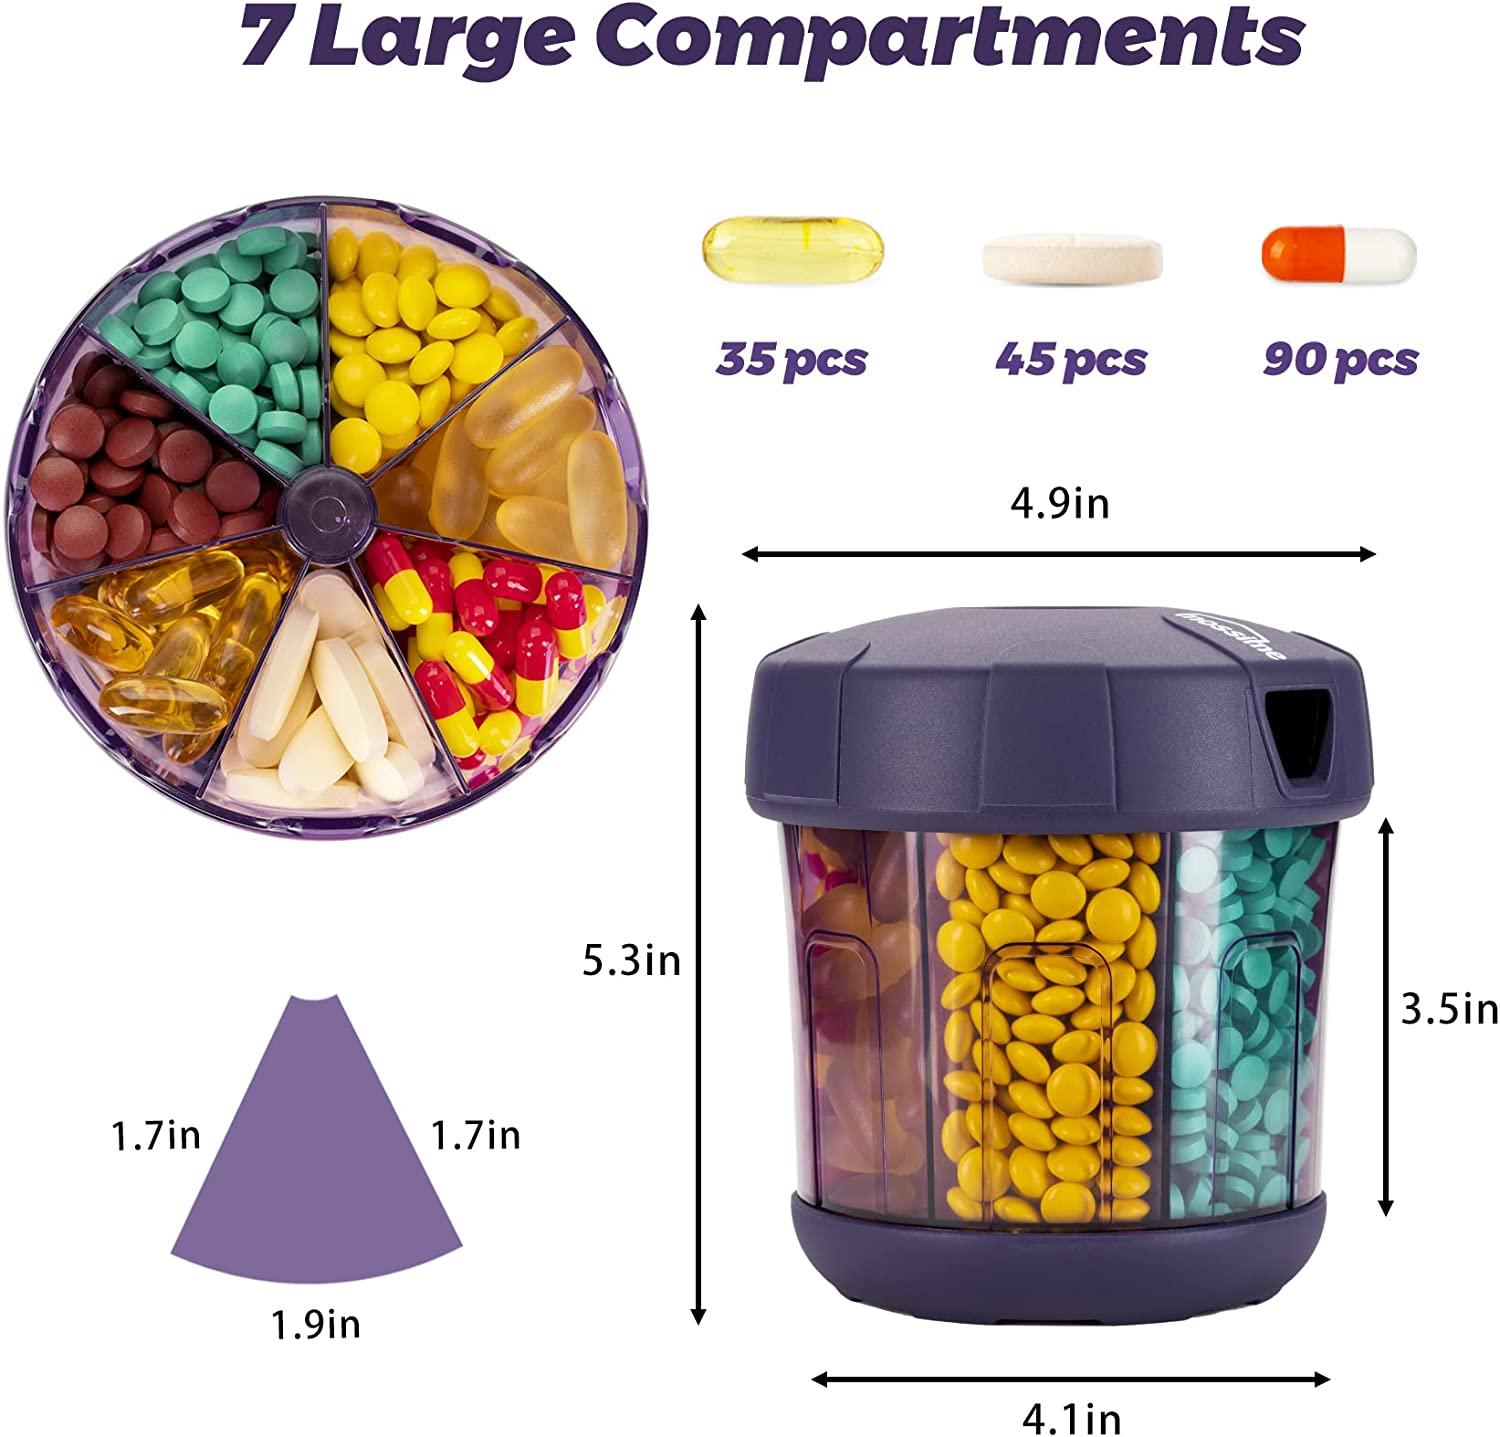  GMS 12 Compartment Supplement Organizer with an